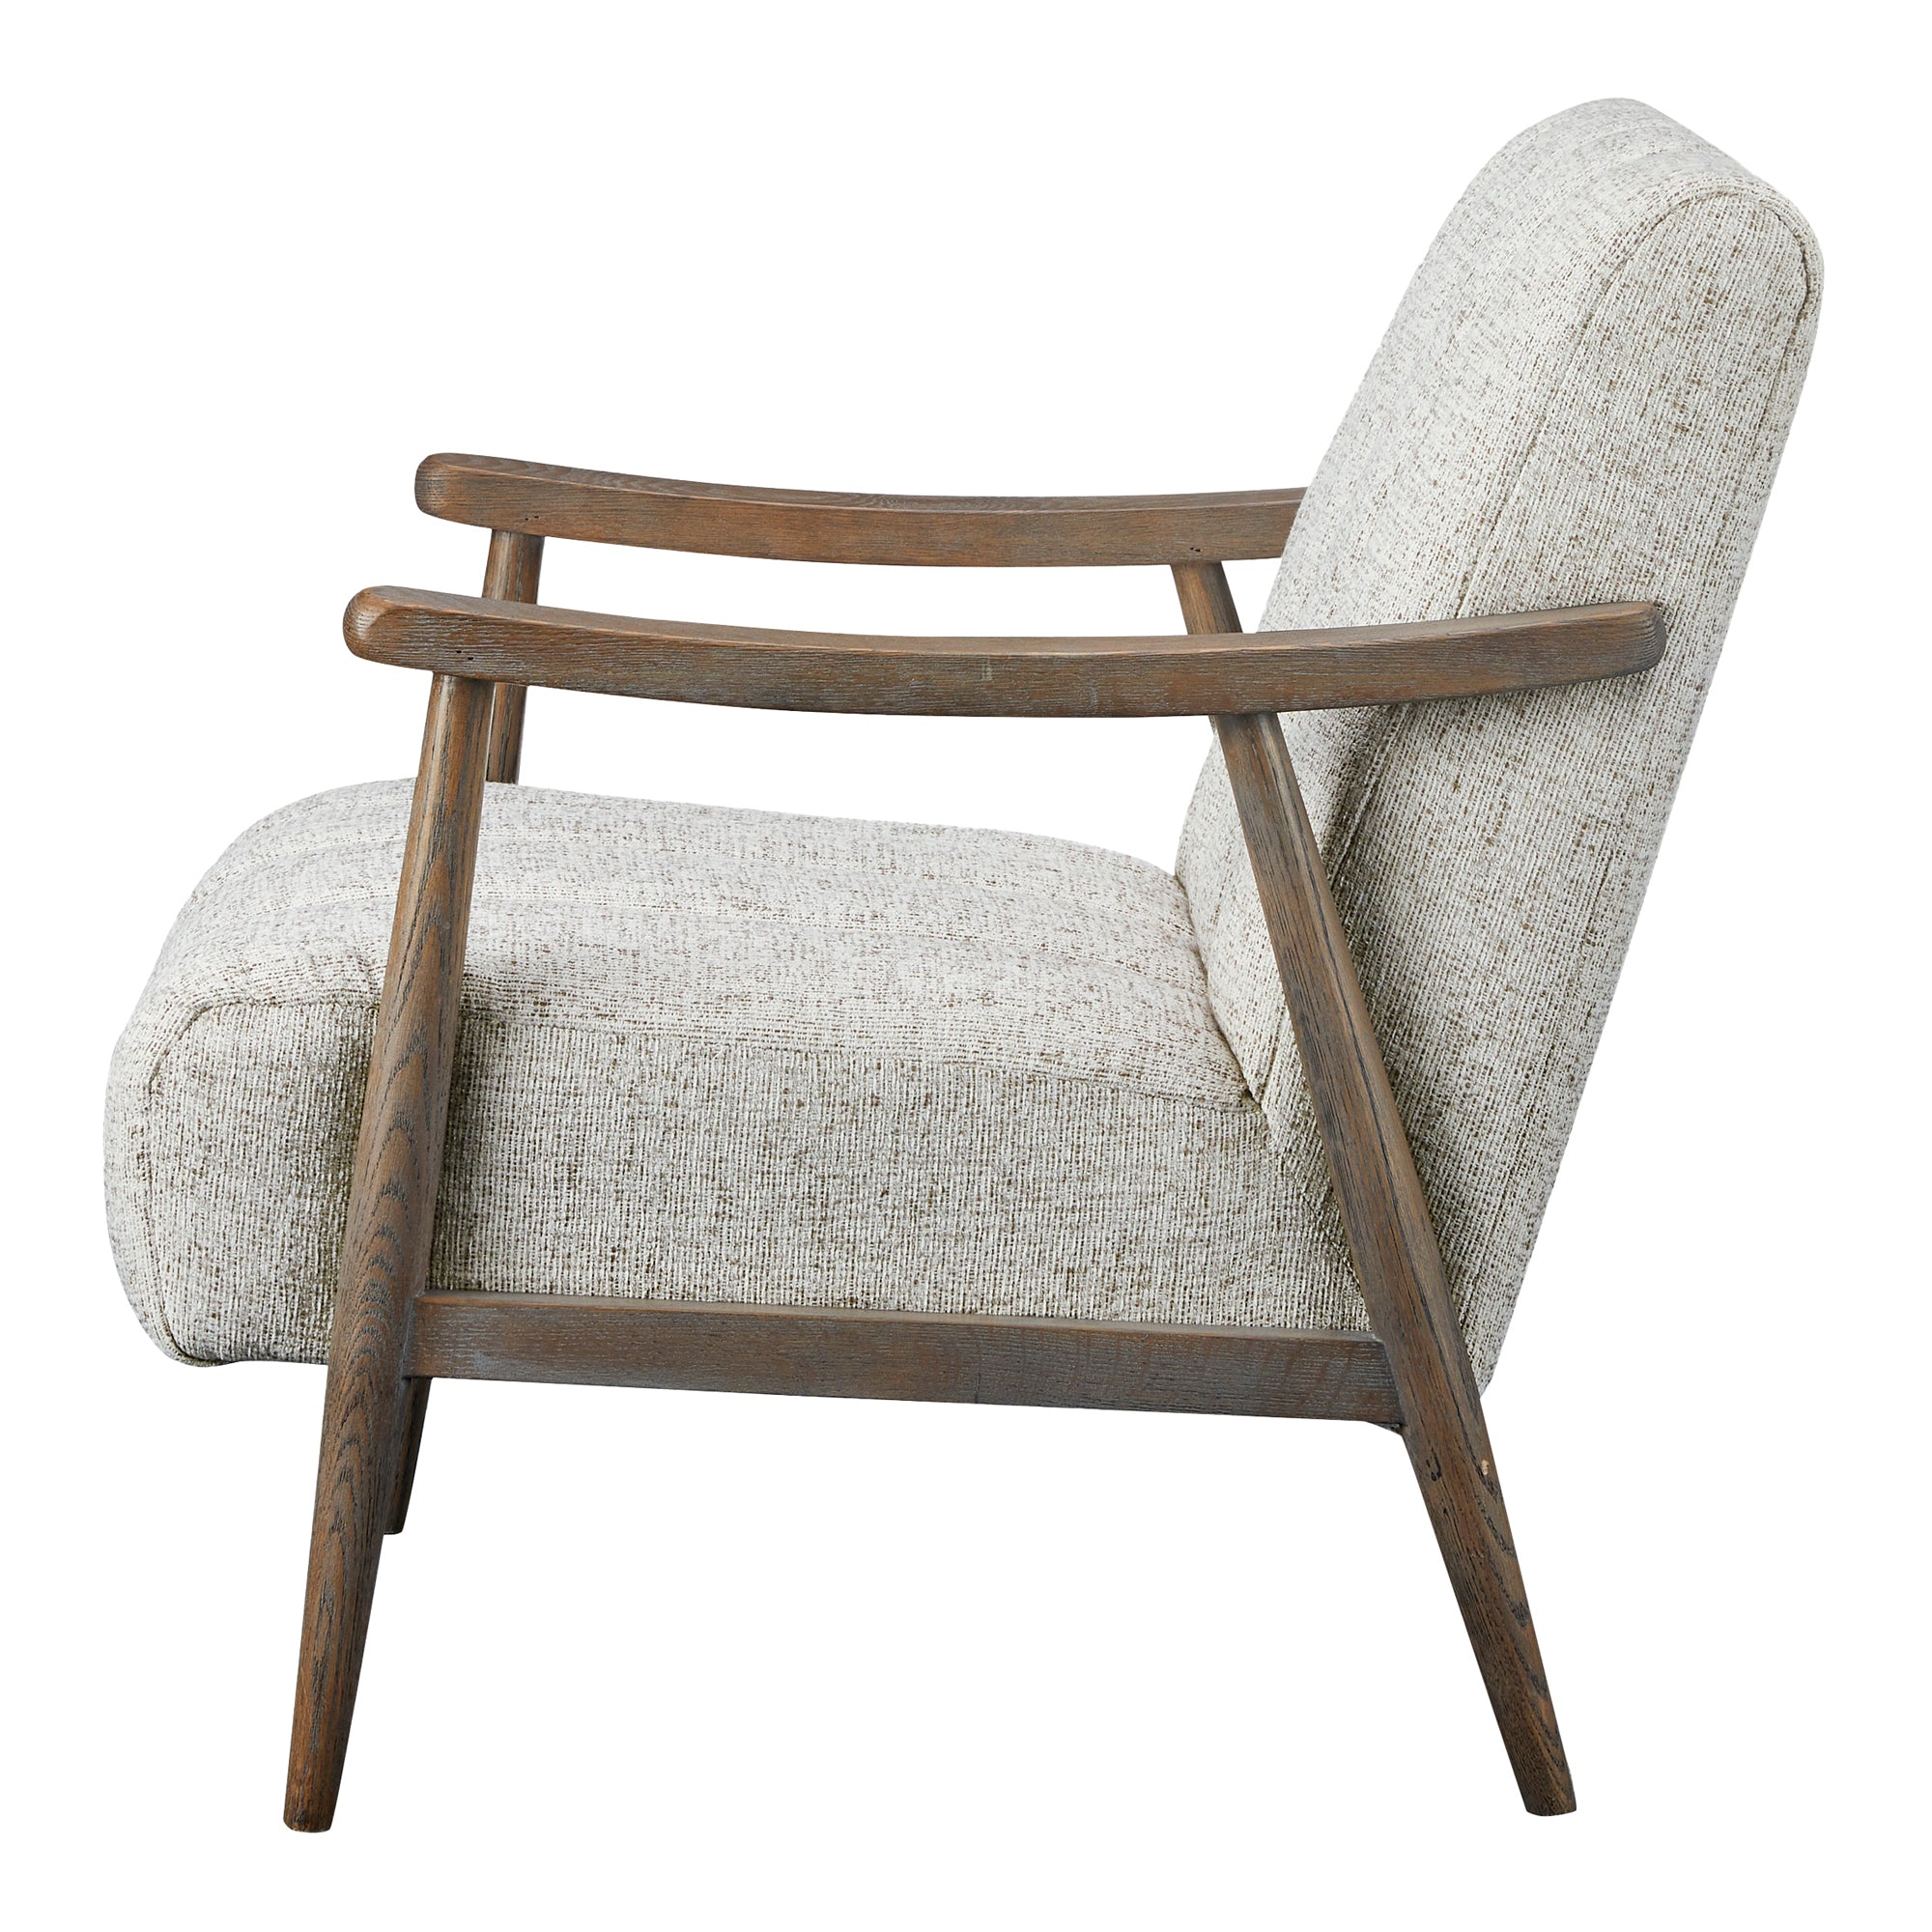 Aster Accent Chair